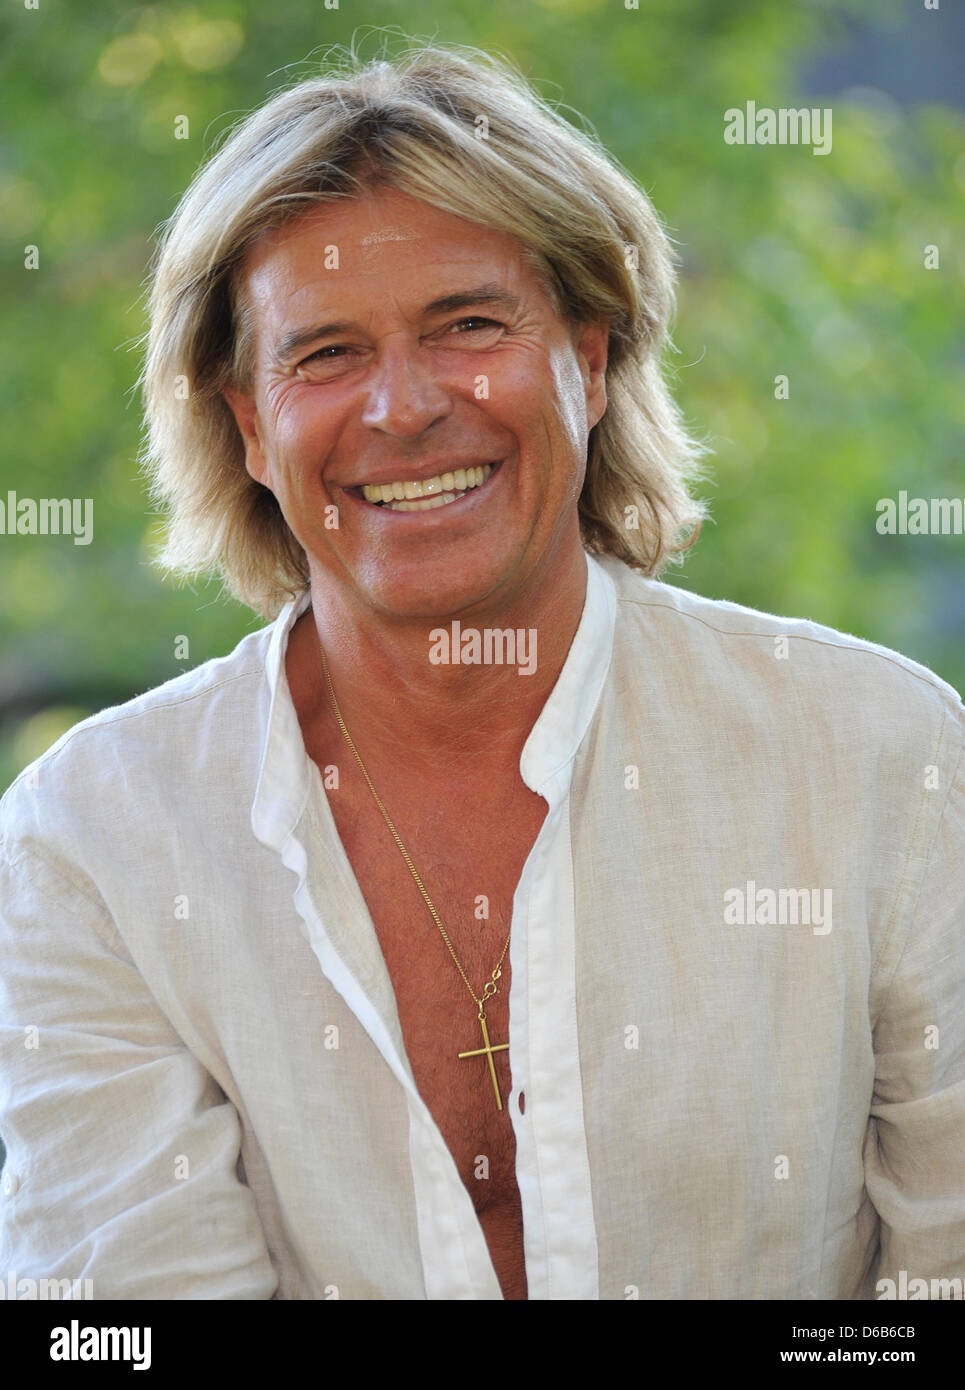 Hansi Hinterseer smiles during the presentation of his new record 'Im siebten Himmel' at the Hauser mountain pasture near Going in Tyrol, Austria, 20 August 2012. Photo: Ursula Dueren Stock Photo